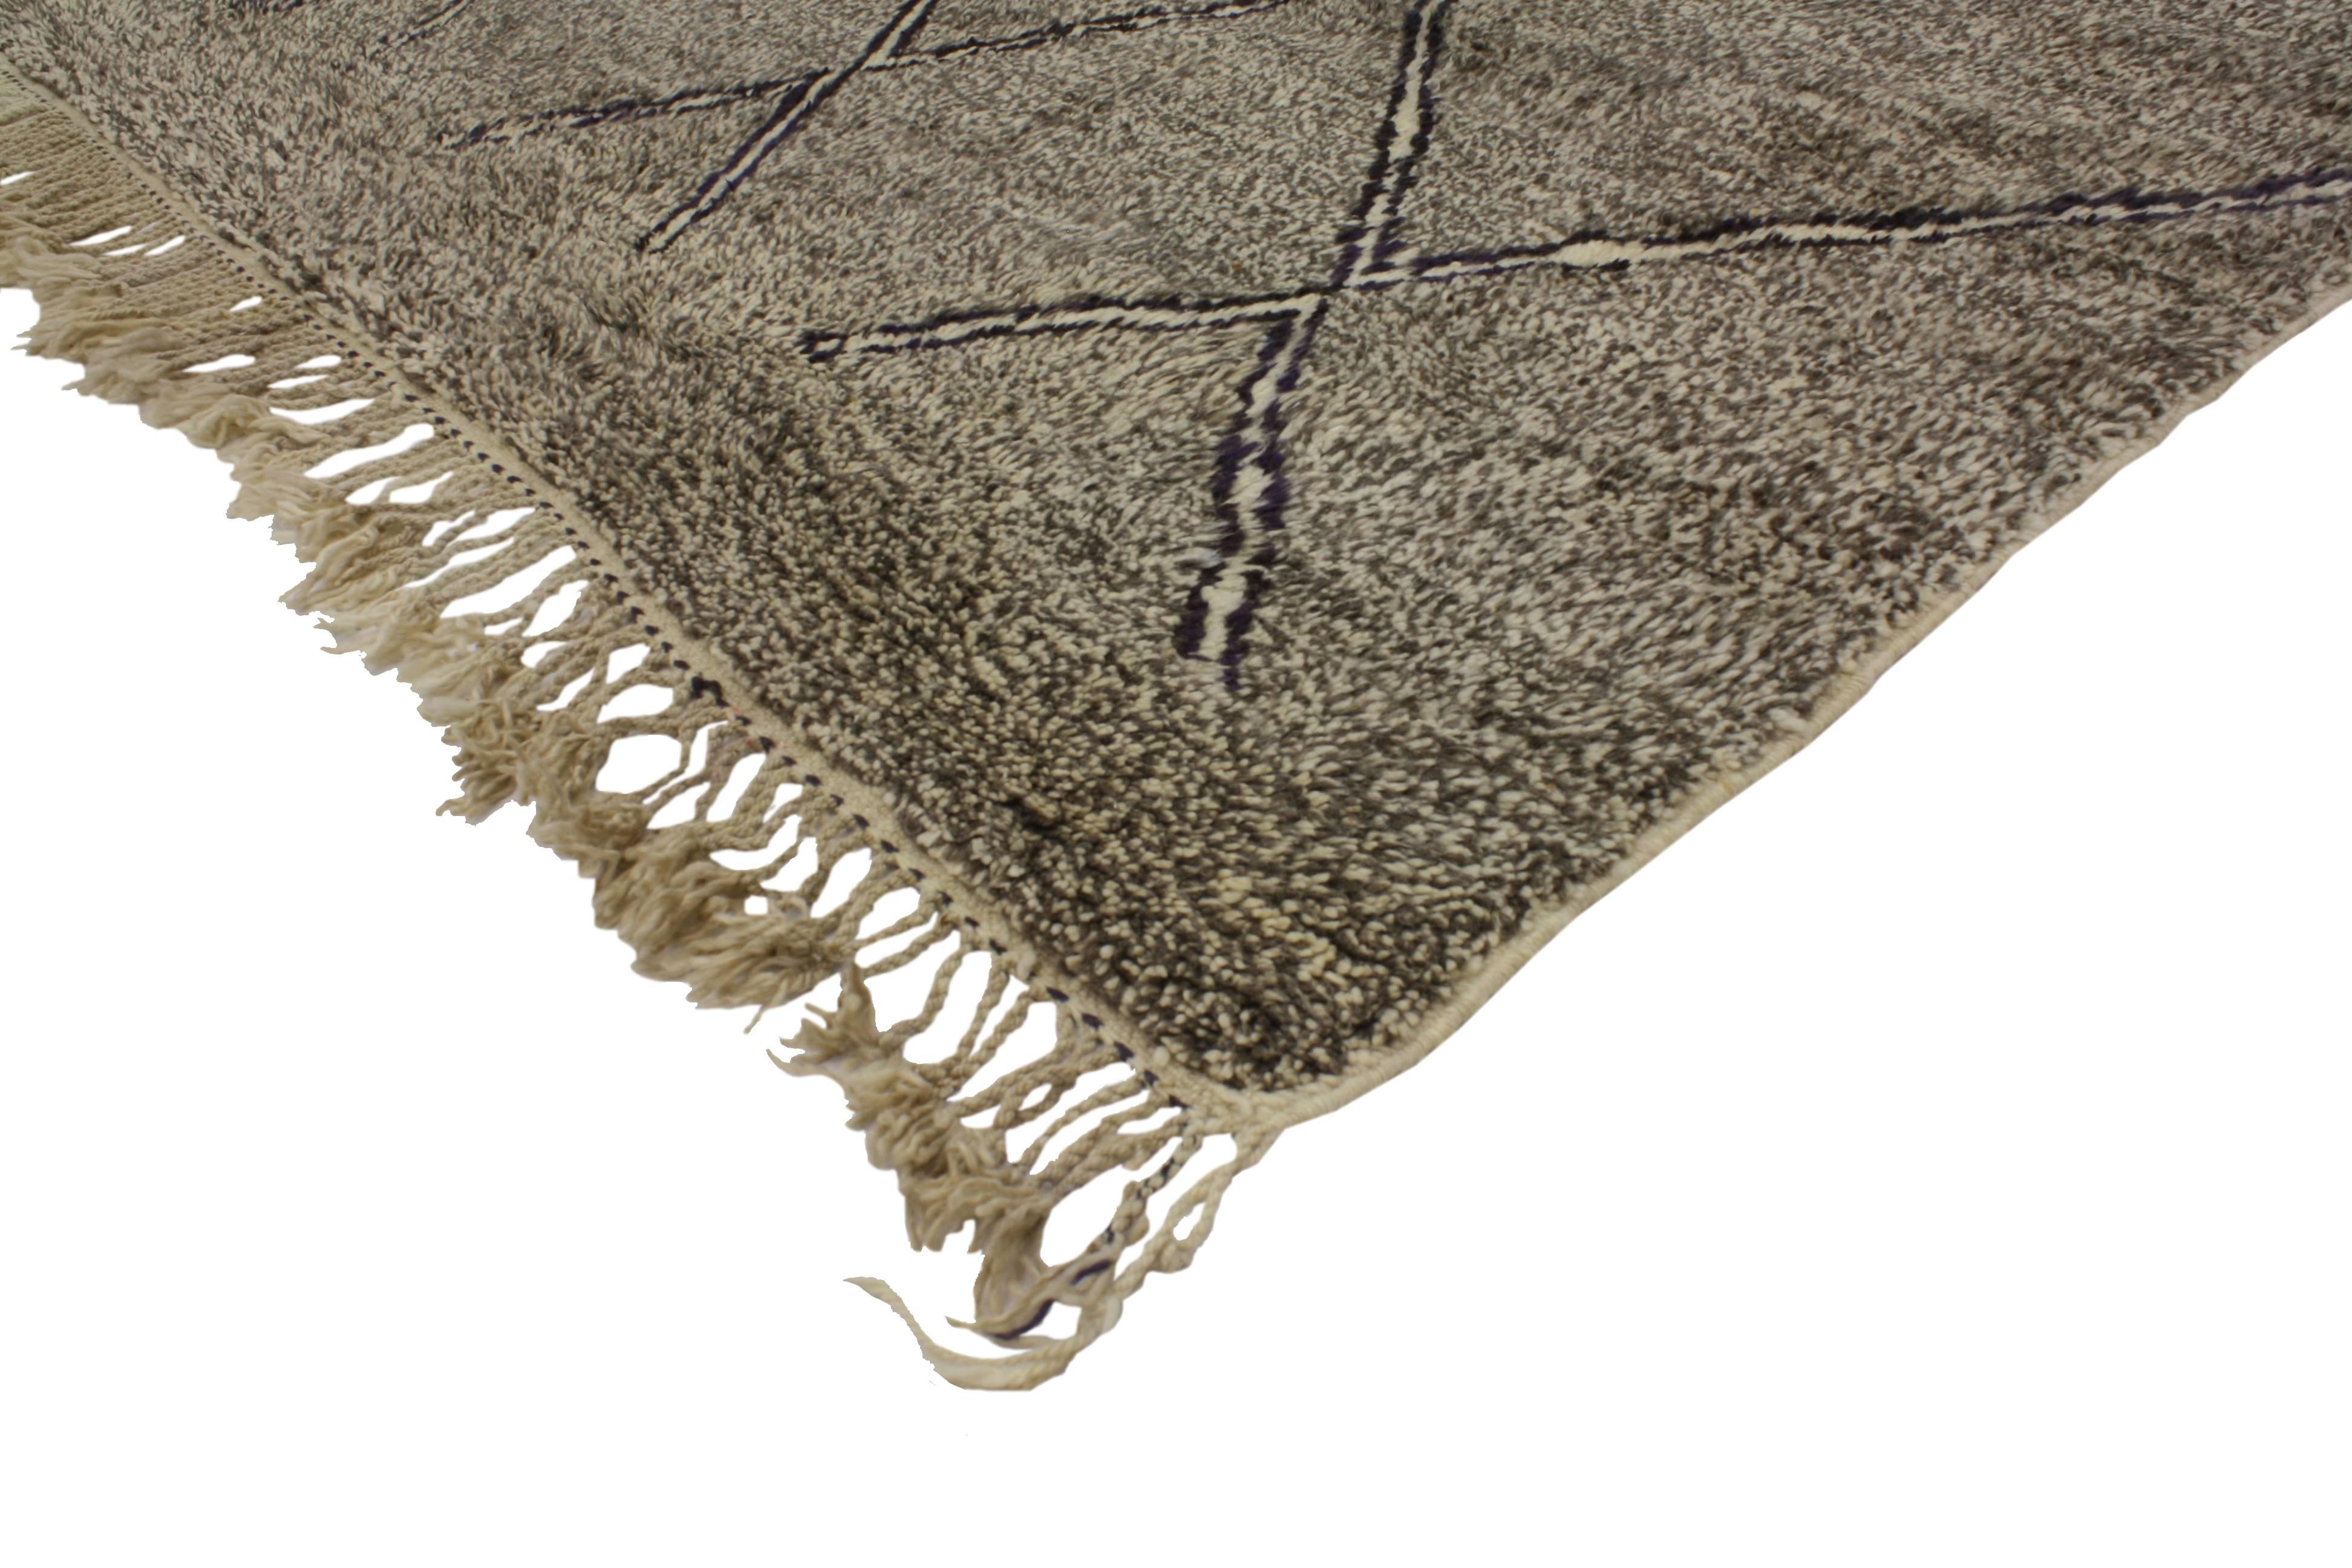 Impeccable craftsmanship and modern style, this taupe Berber Moroccan rug is Classic and a beautiful balance of warm and cool. The high-contrast combined with its plush wool complement the trending style. Featuring a neutral color palette of